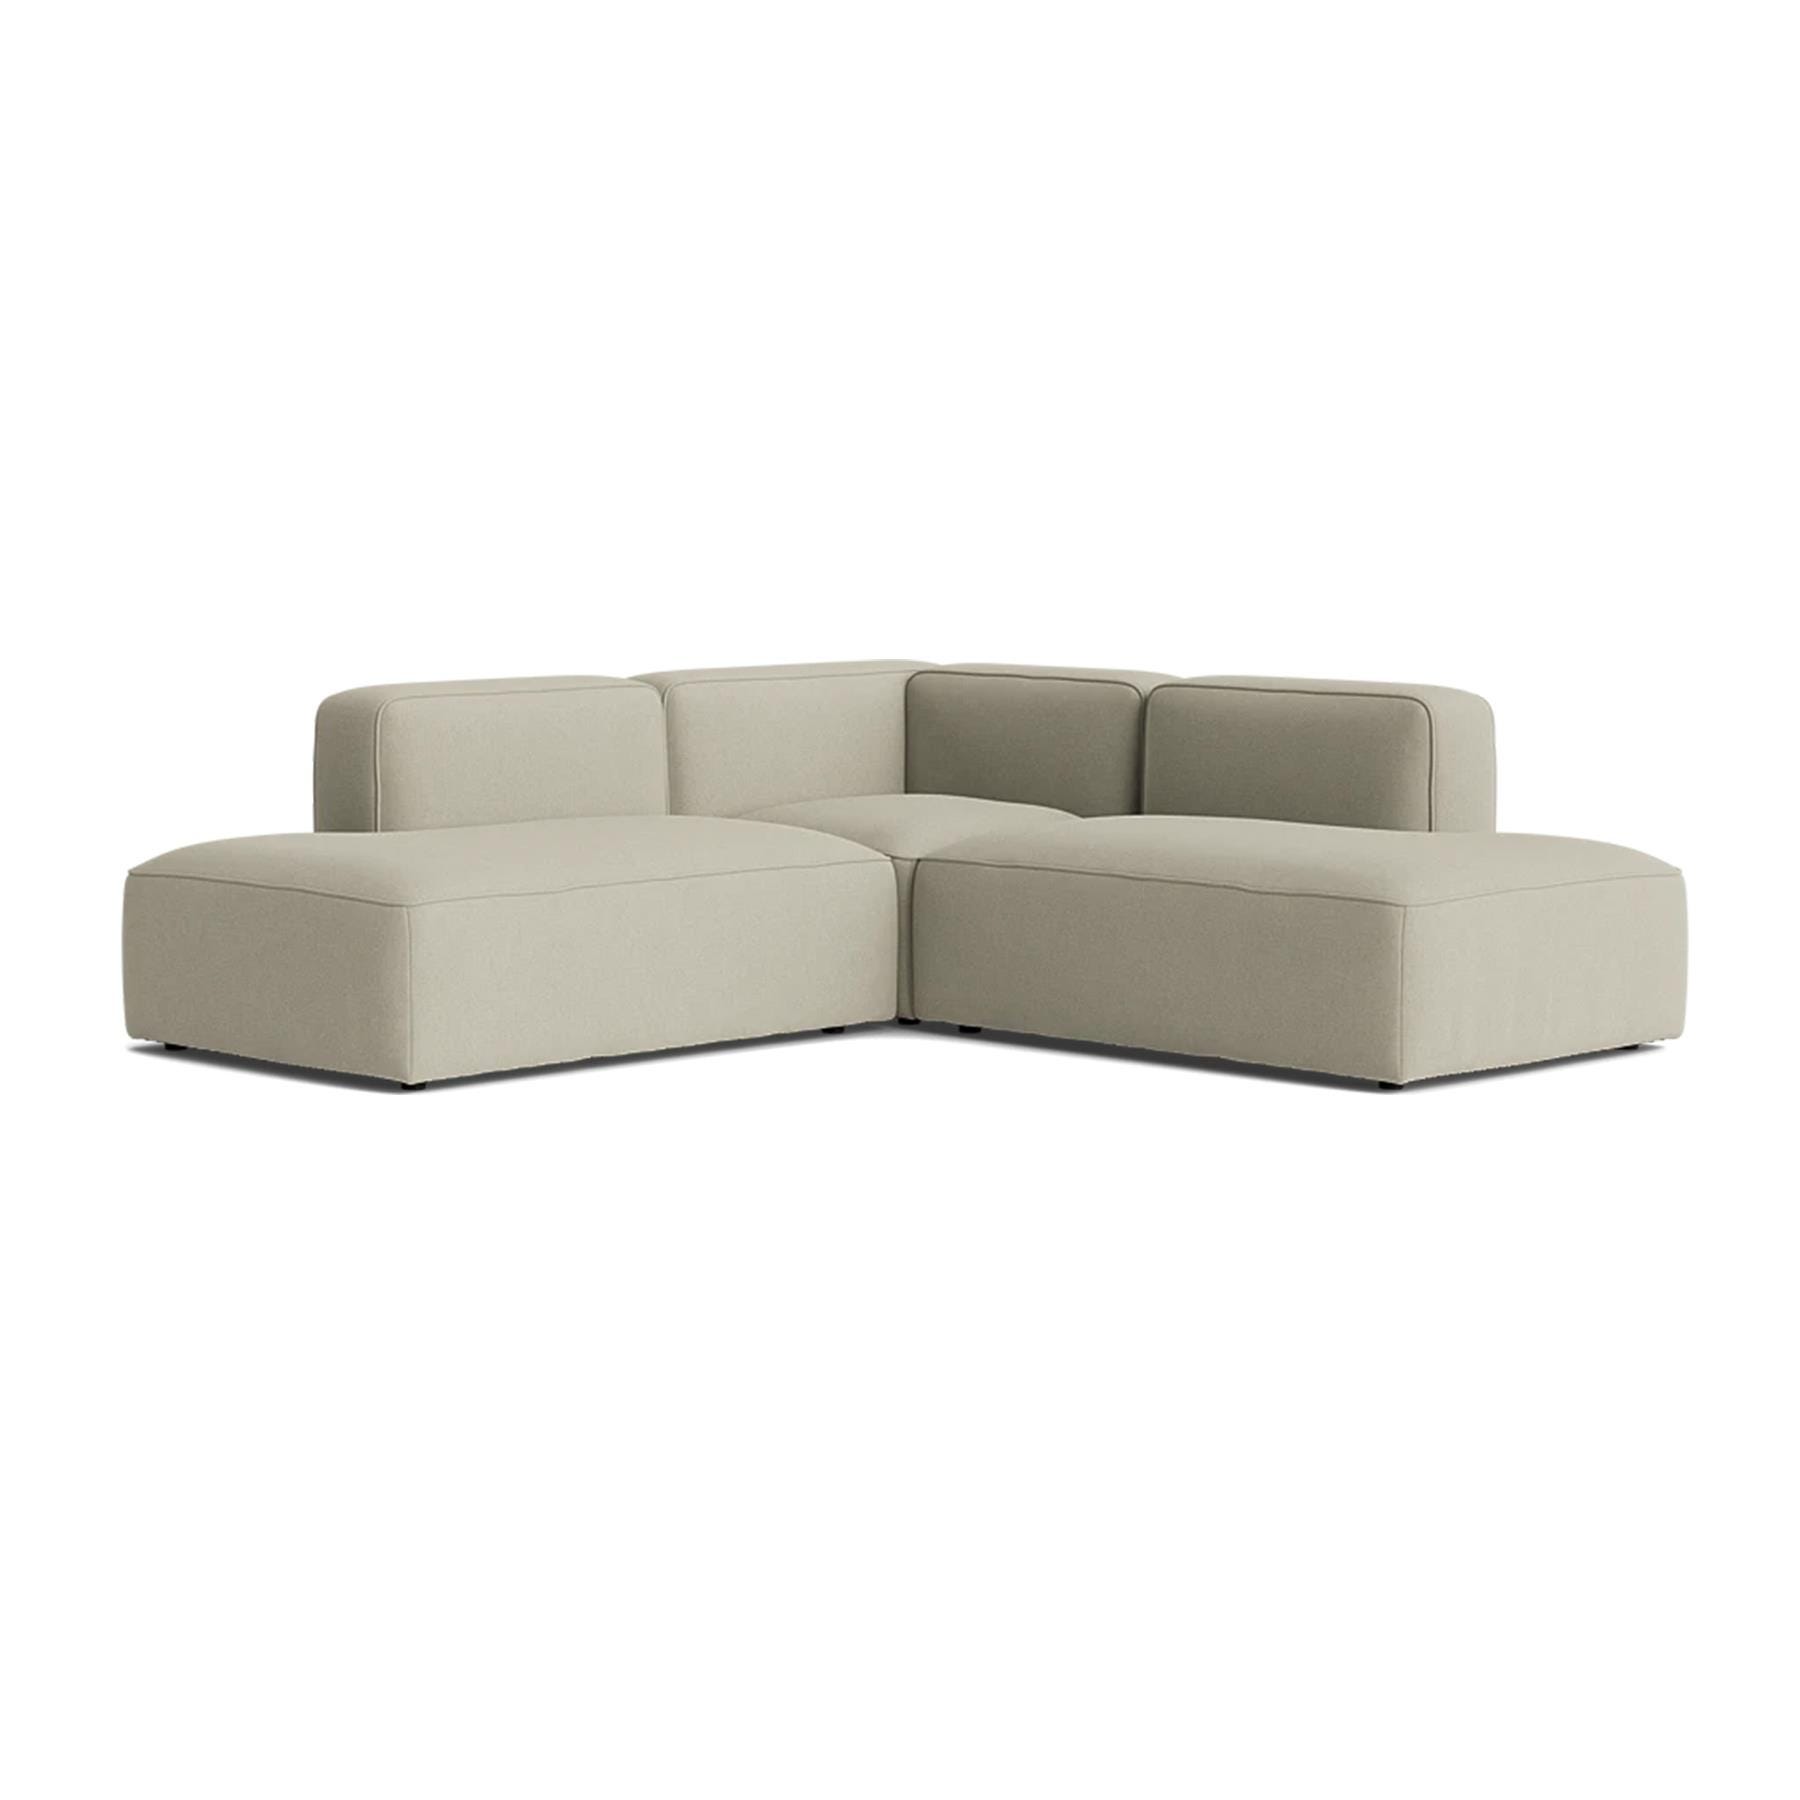 Make Nordic Basecamp Corner Sofa With Open Ends Fiord 322 Brown Designer Furniture From Holloways Of Ludlow